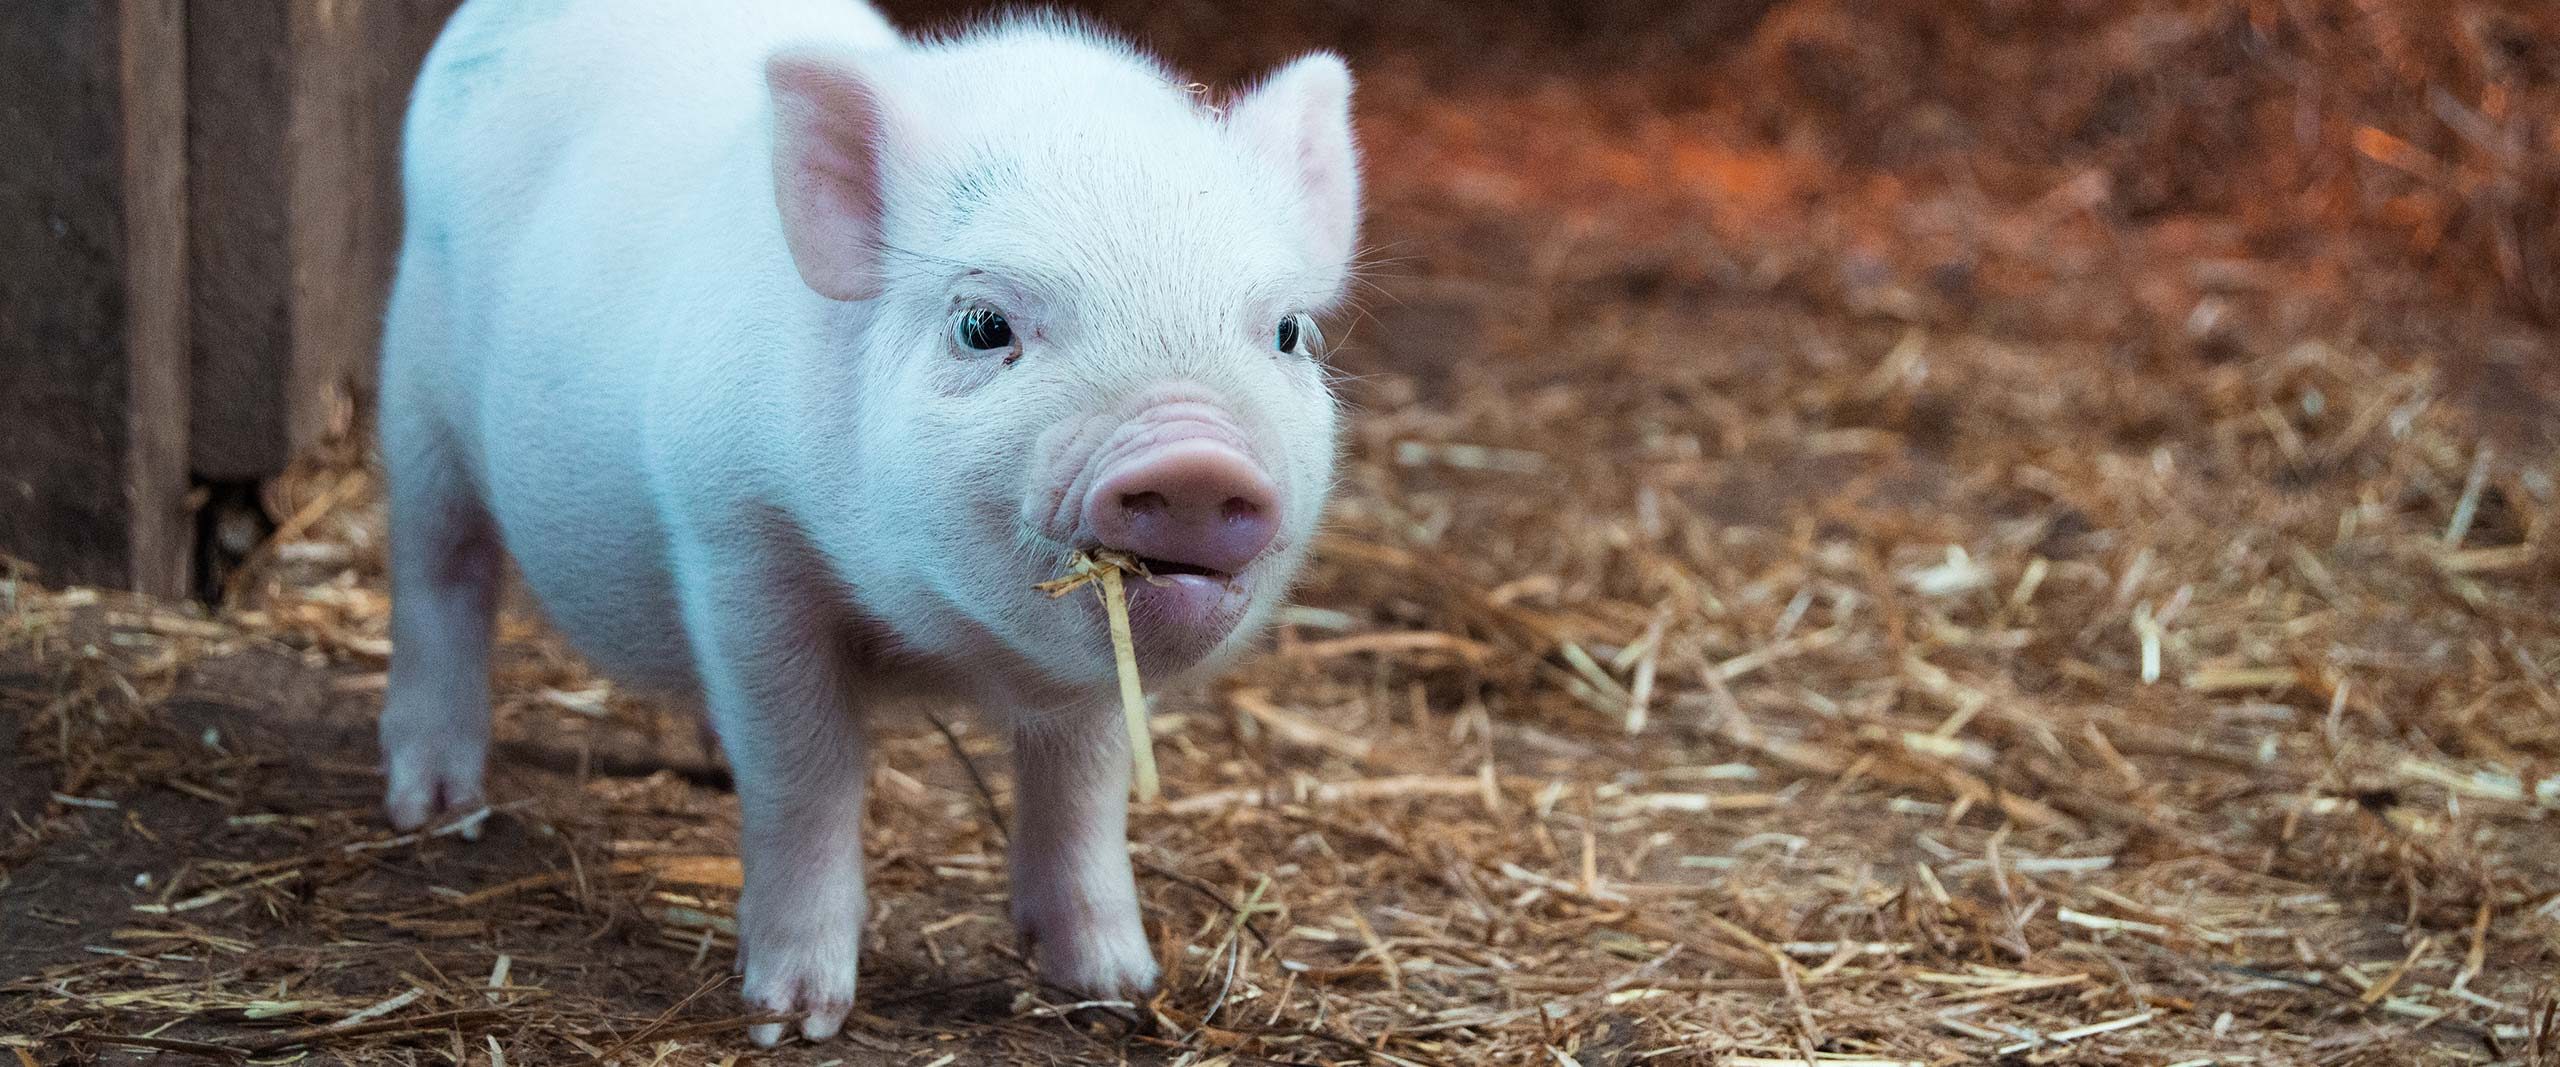 The Intelligence Of Pigs, Comparable To Elephants And Dolphins